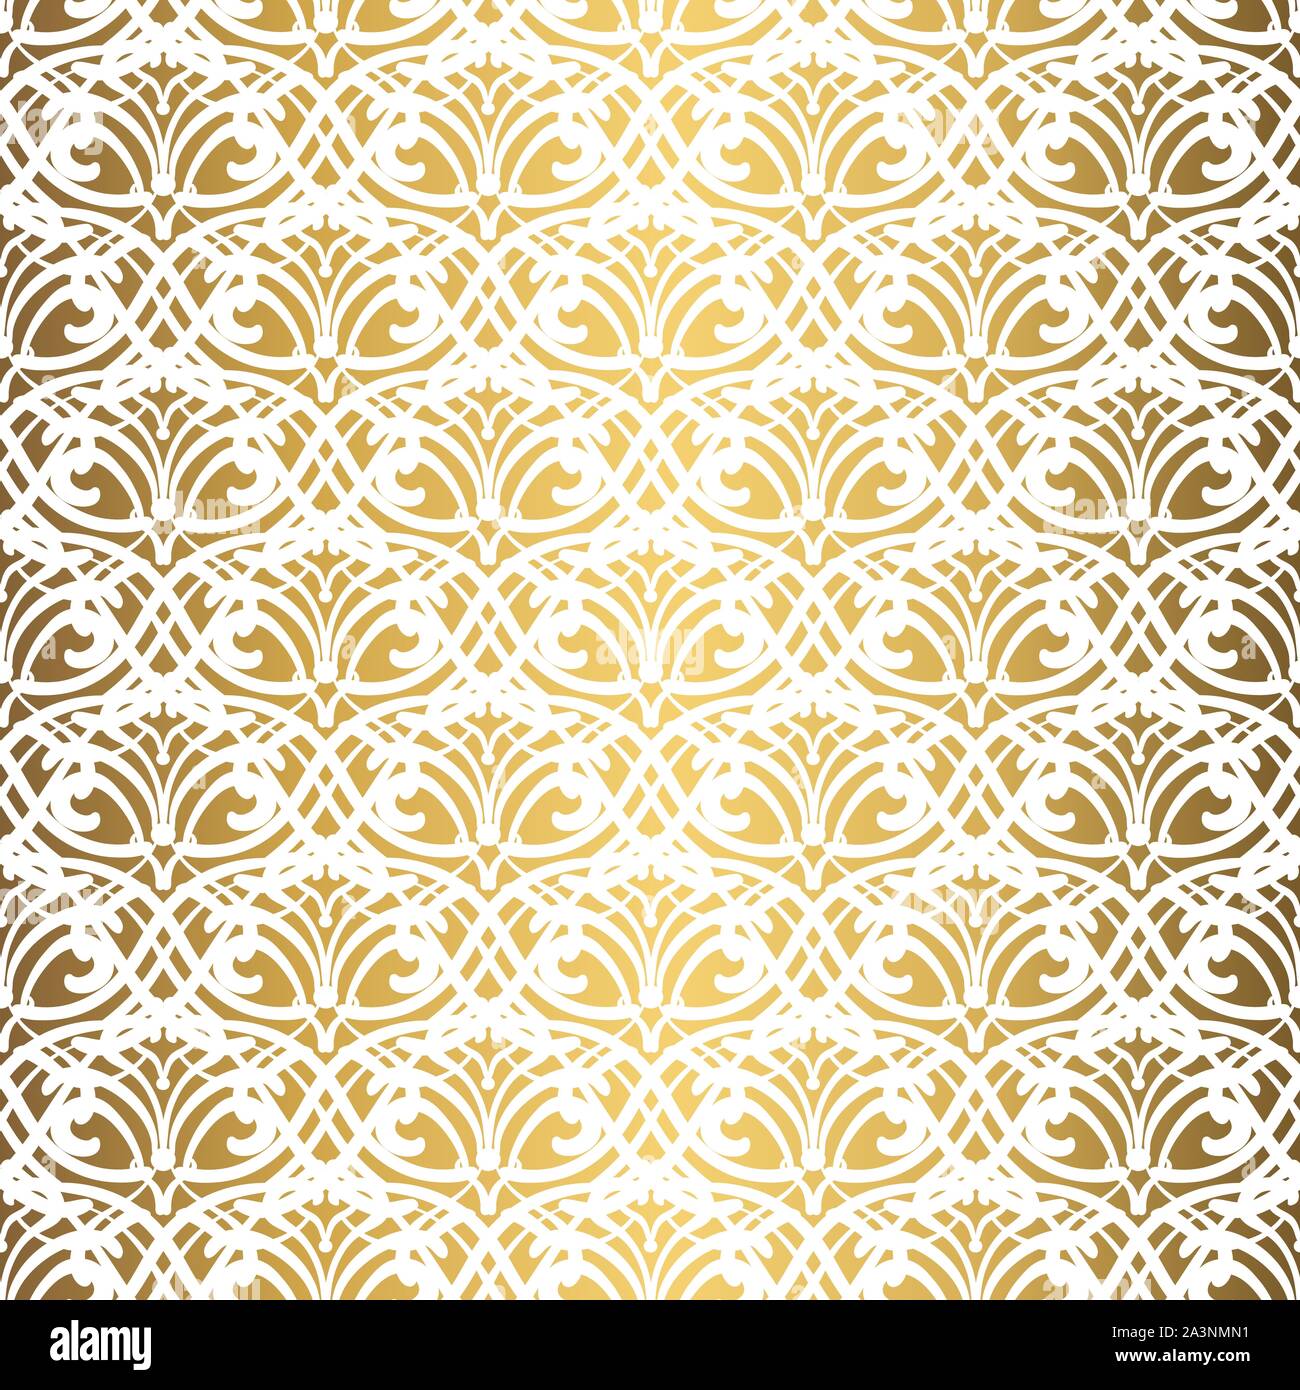 Golden background. Luxury seamless pattern. Elegant weave ornament for wallpaper, fabric, upholstery, bedding, drapery, wedding invitation. Abstract f Stock Vector